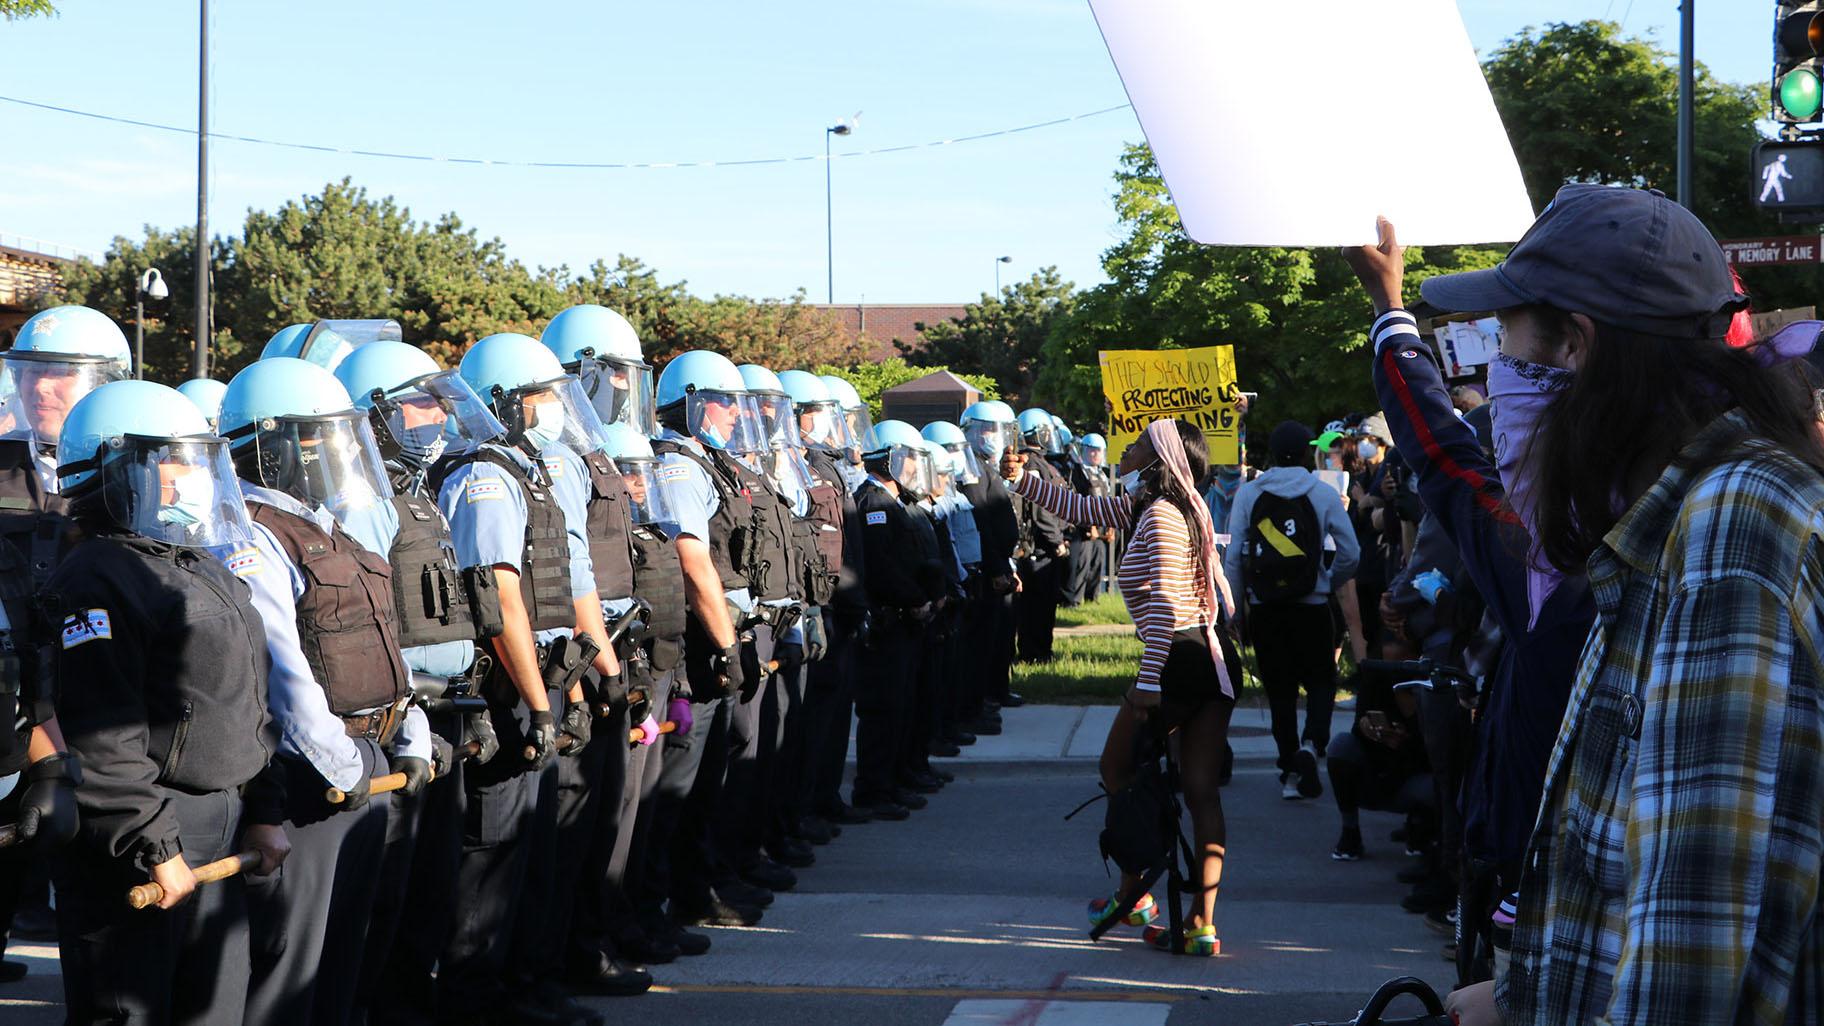 Protesters yell at a line of police officers at State and 35th streets, about 3 miles south of the Loop, where police set up a blockade on Sunday, May 31, 2020. (Evan Garcia / WTTW News)